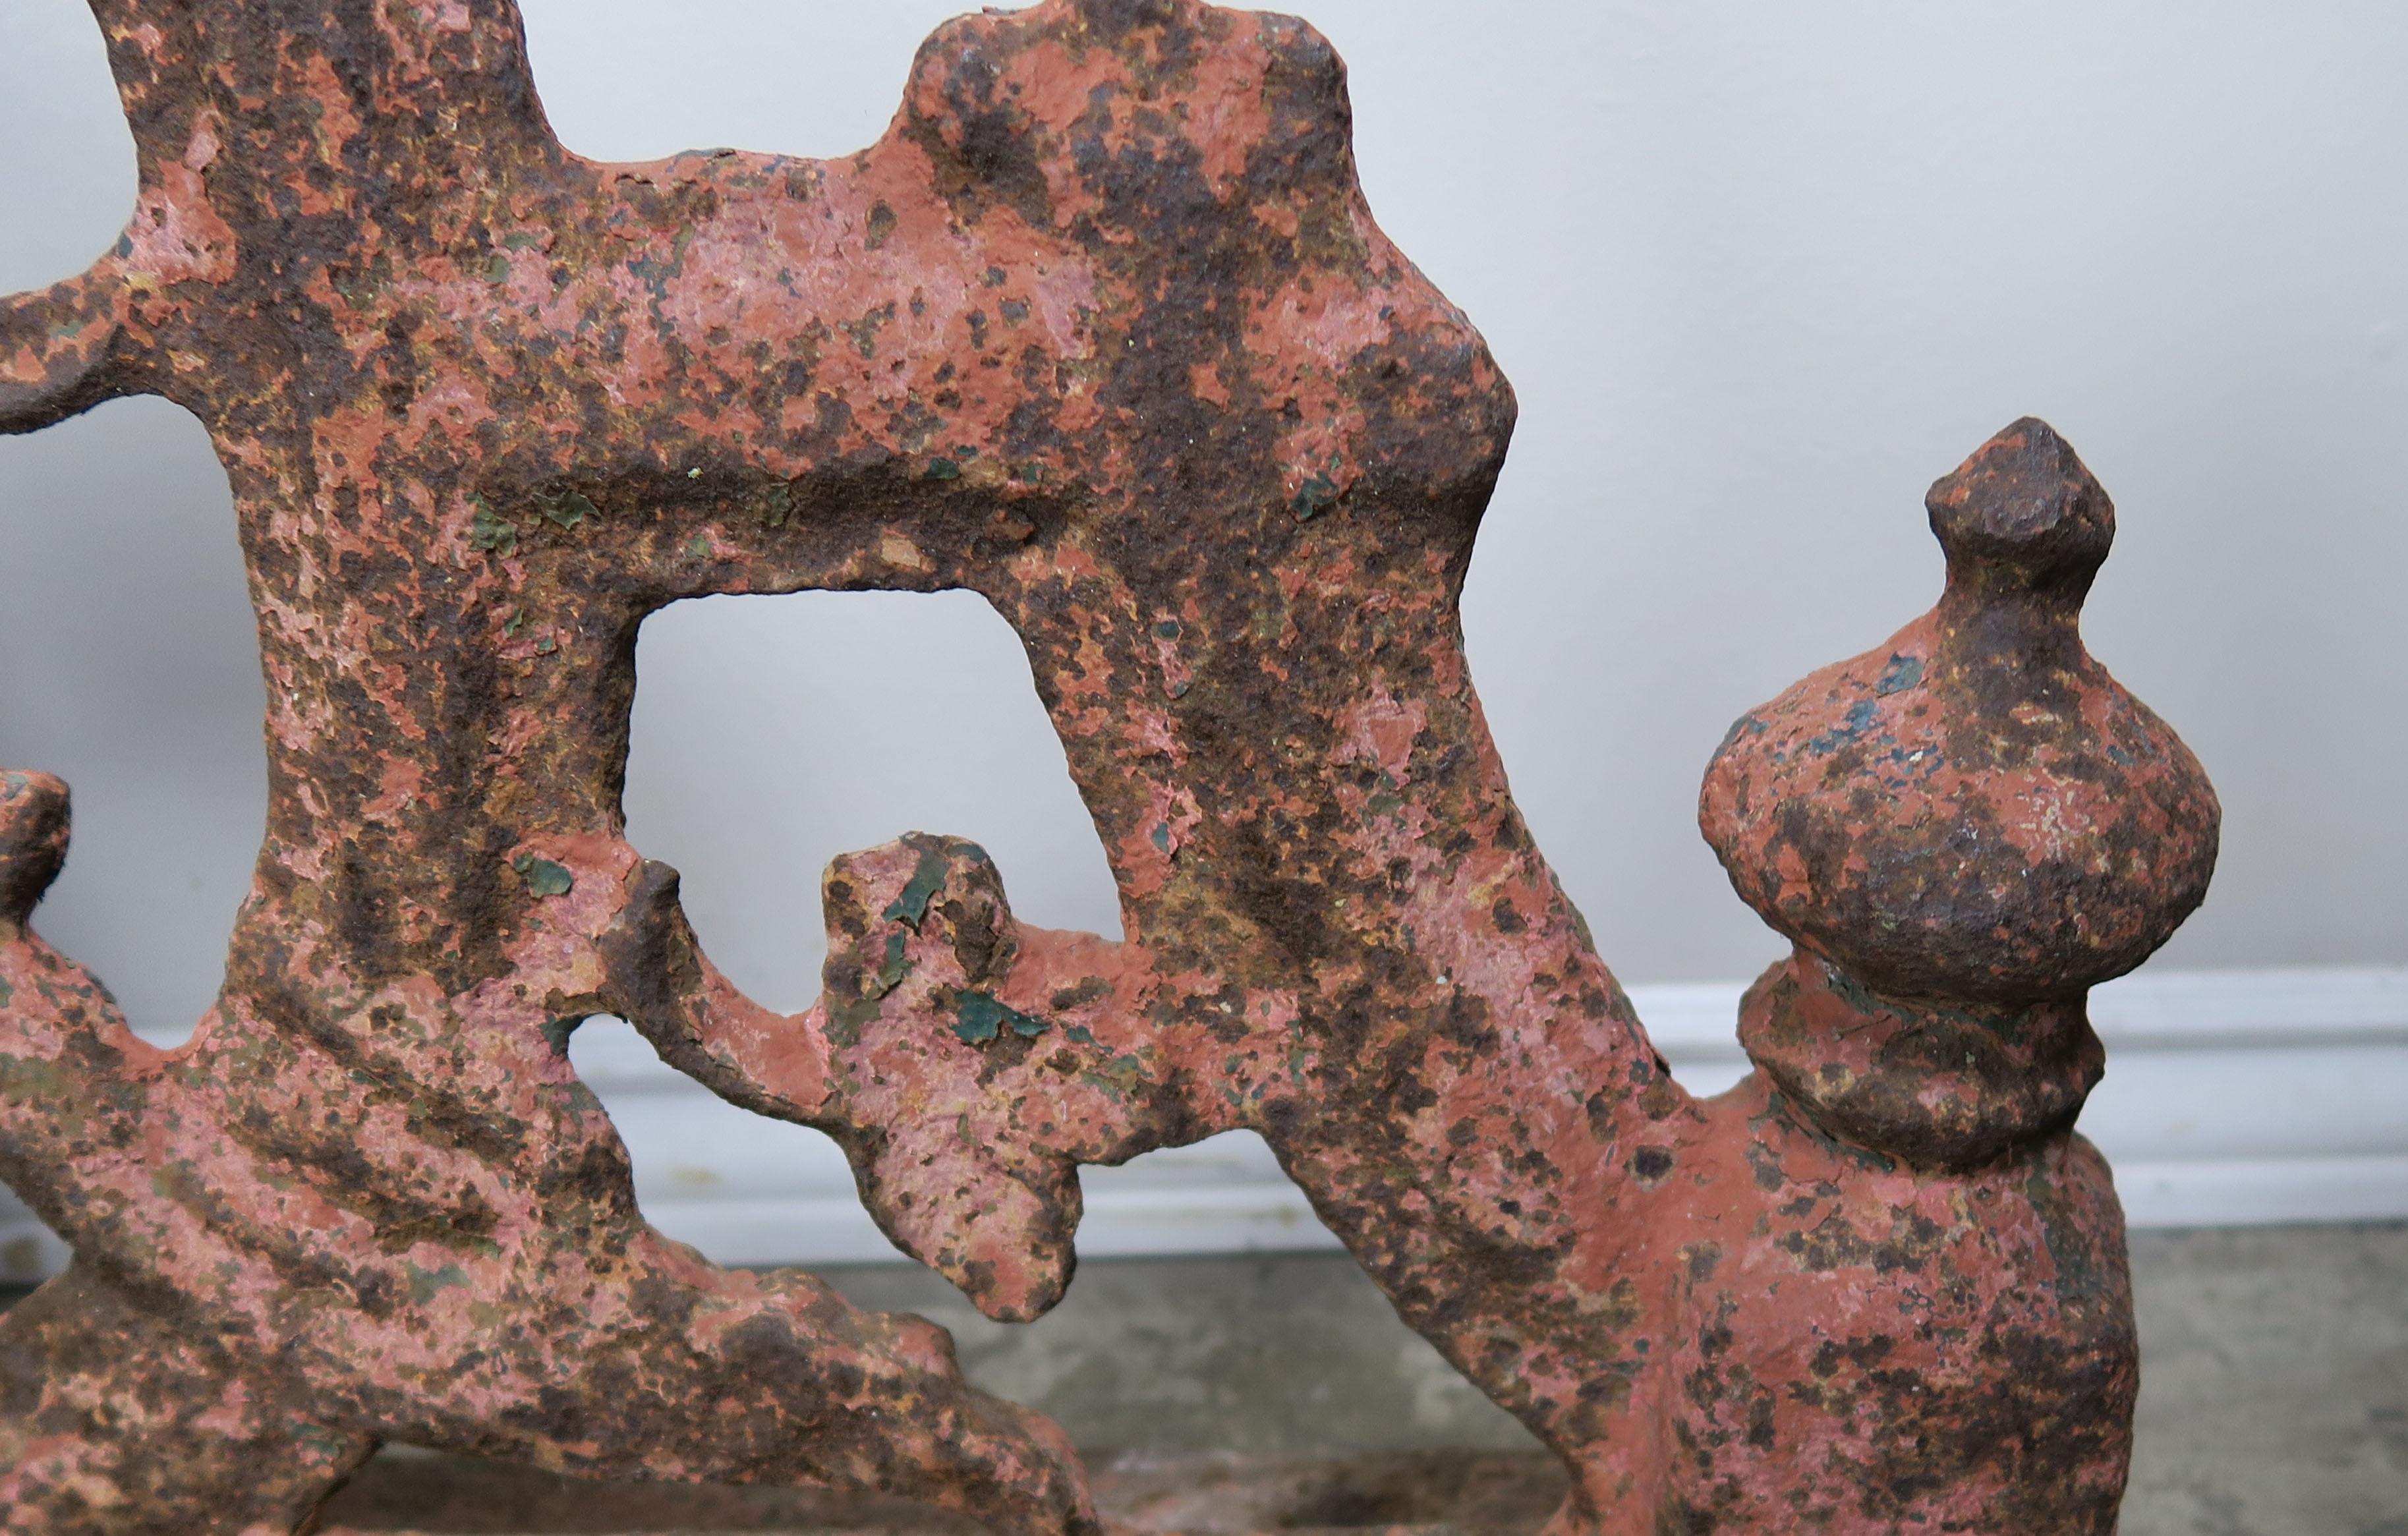 Pair of 19th Century American Painted Cast Iron Architectural Brackets 